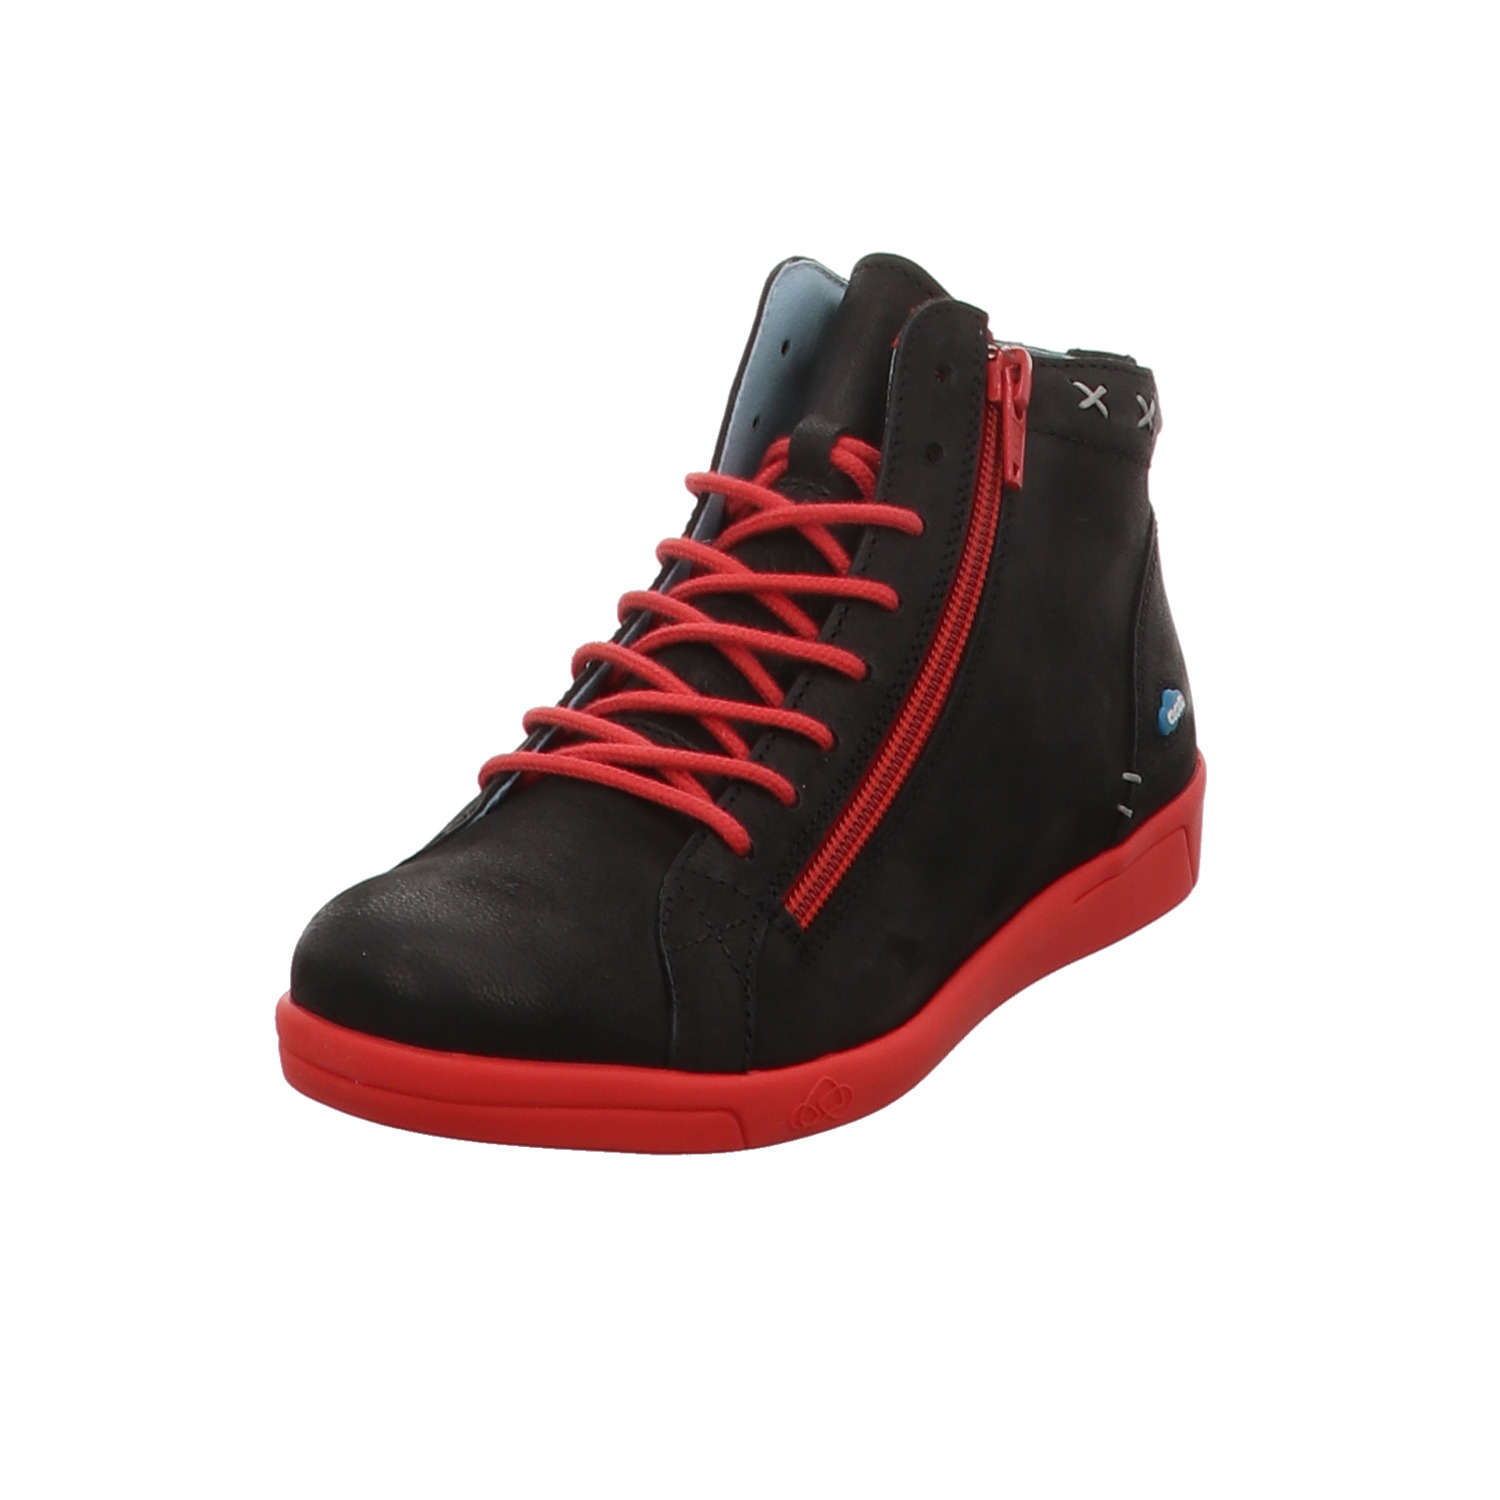 Coud Boots Aika Boot nobuck black/red